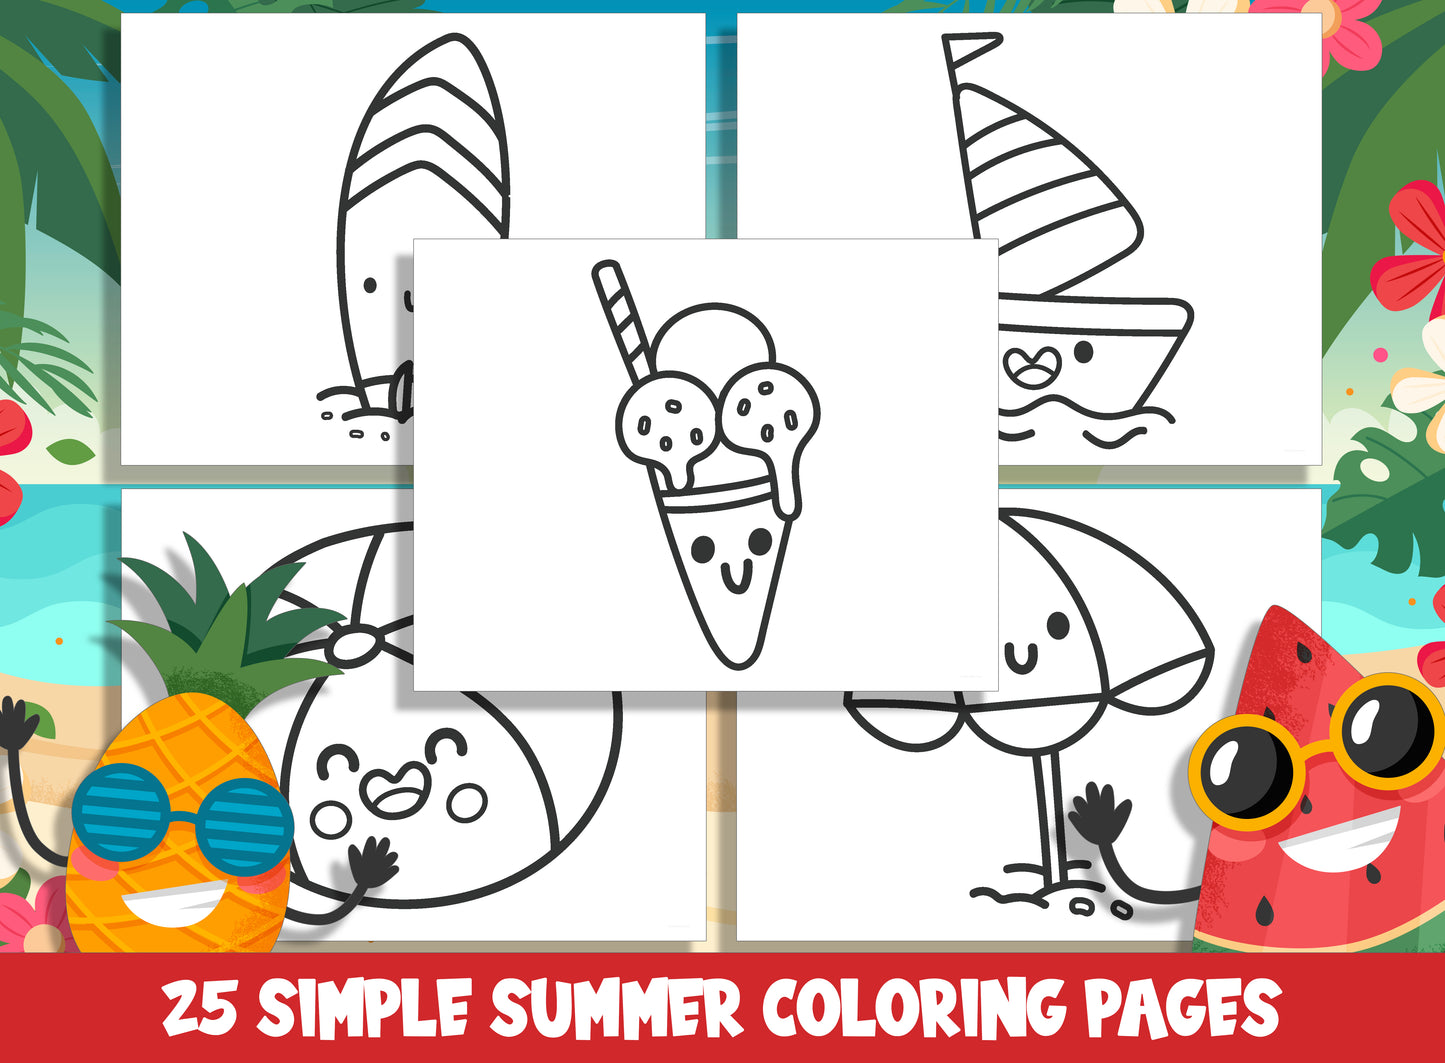 25 Cute Simple Summer Coloring Pages, Large Size, Thick Border, Perfect for Preschool & Kindergarten, PDF File, Instant Download